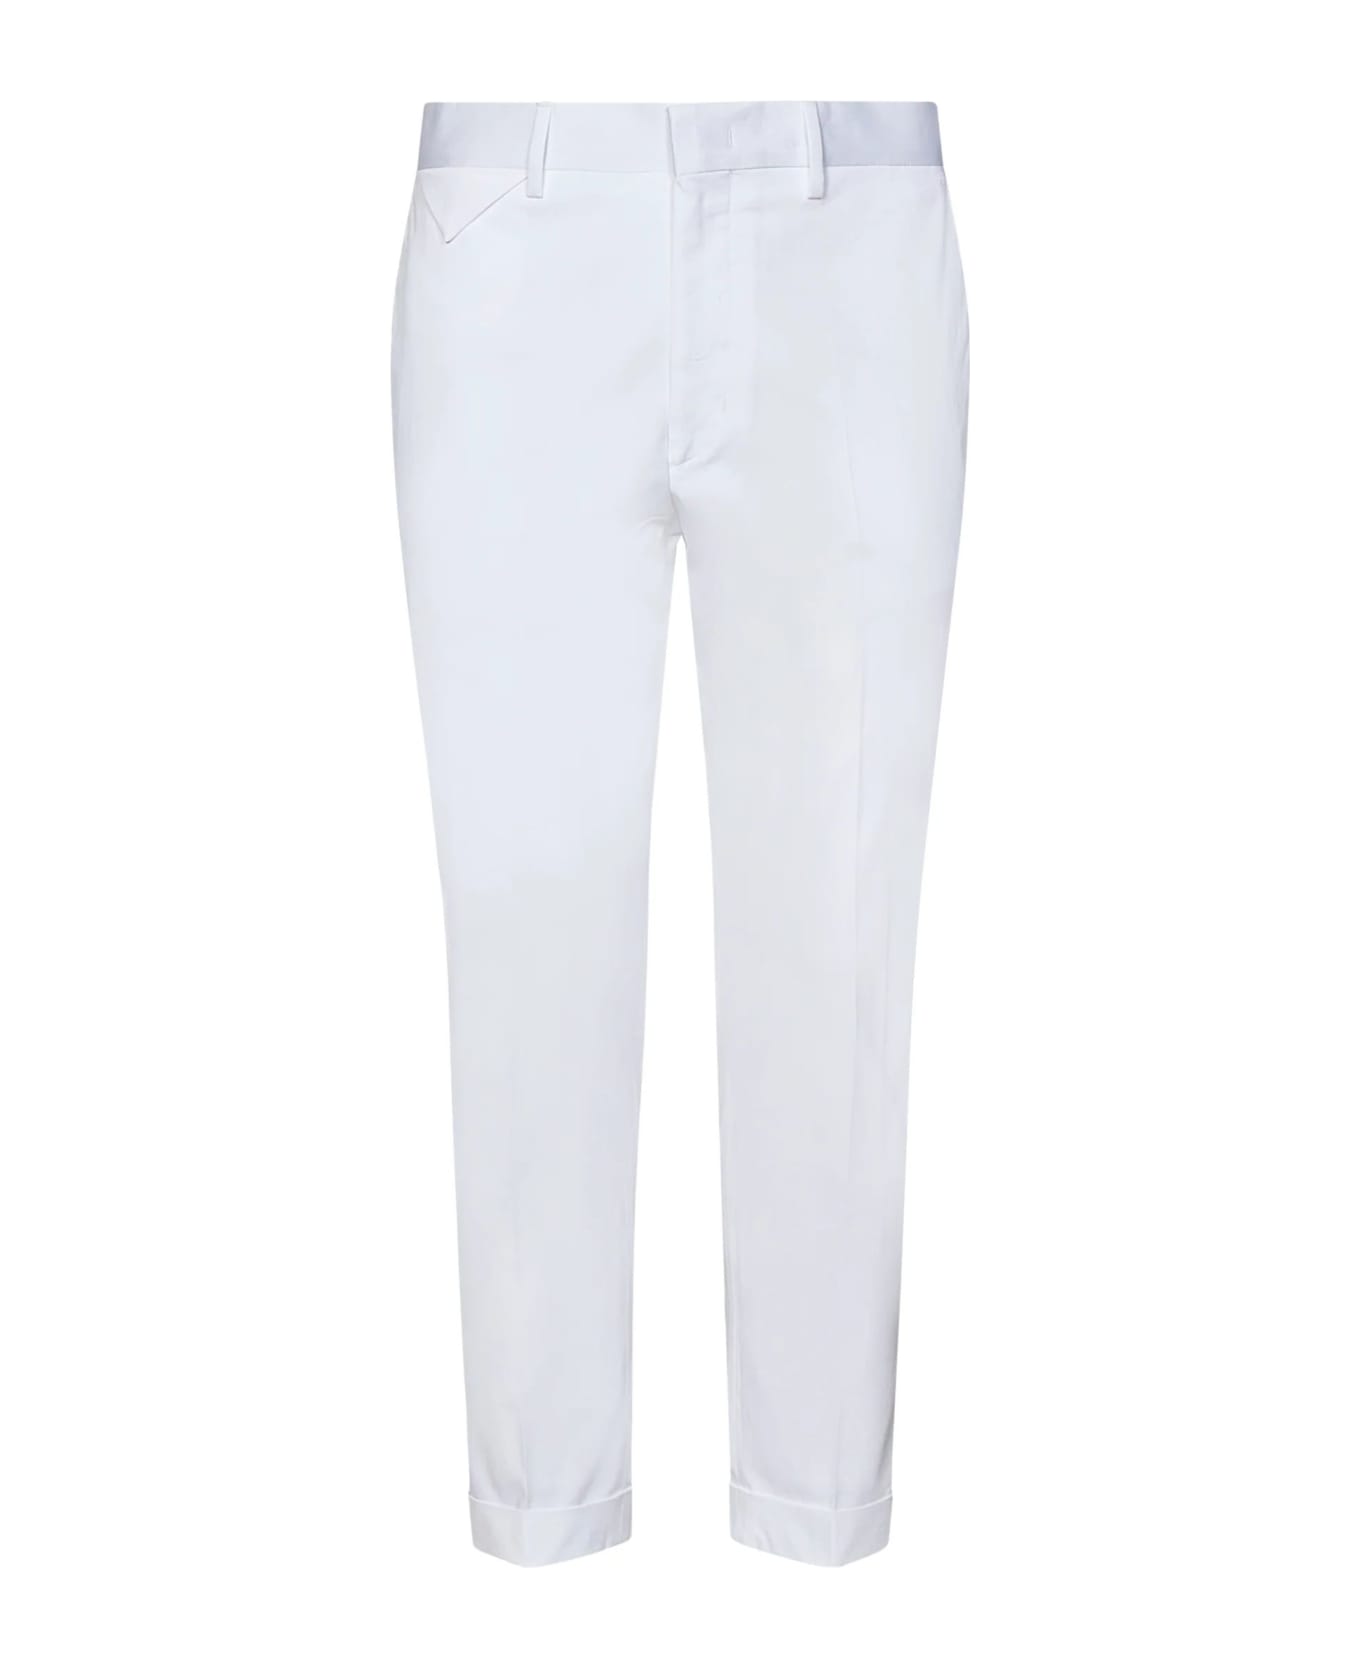 Low Brand Trousers White - White